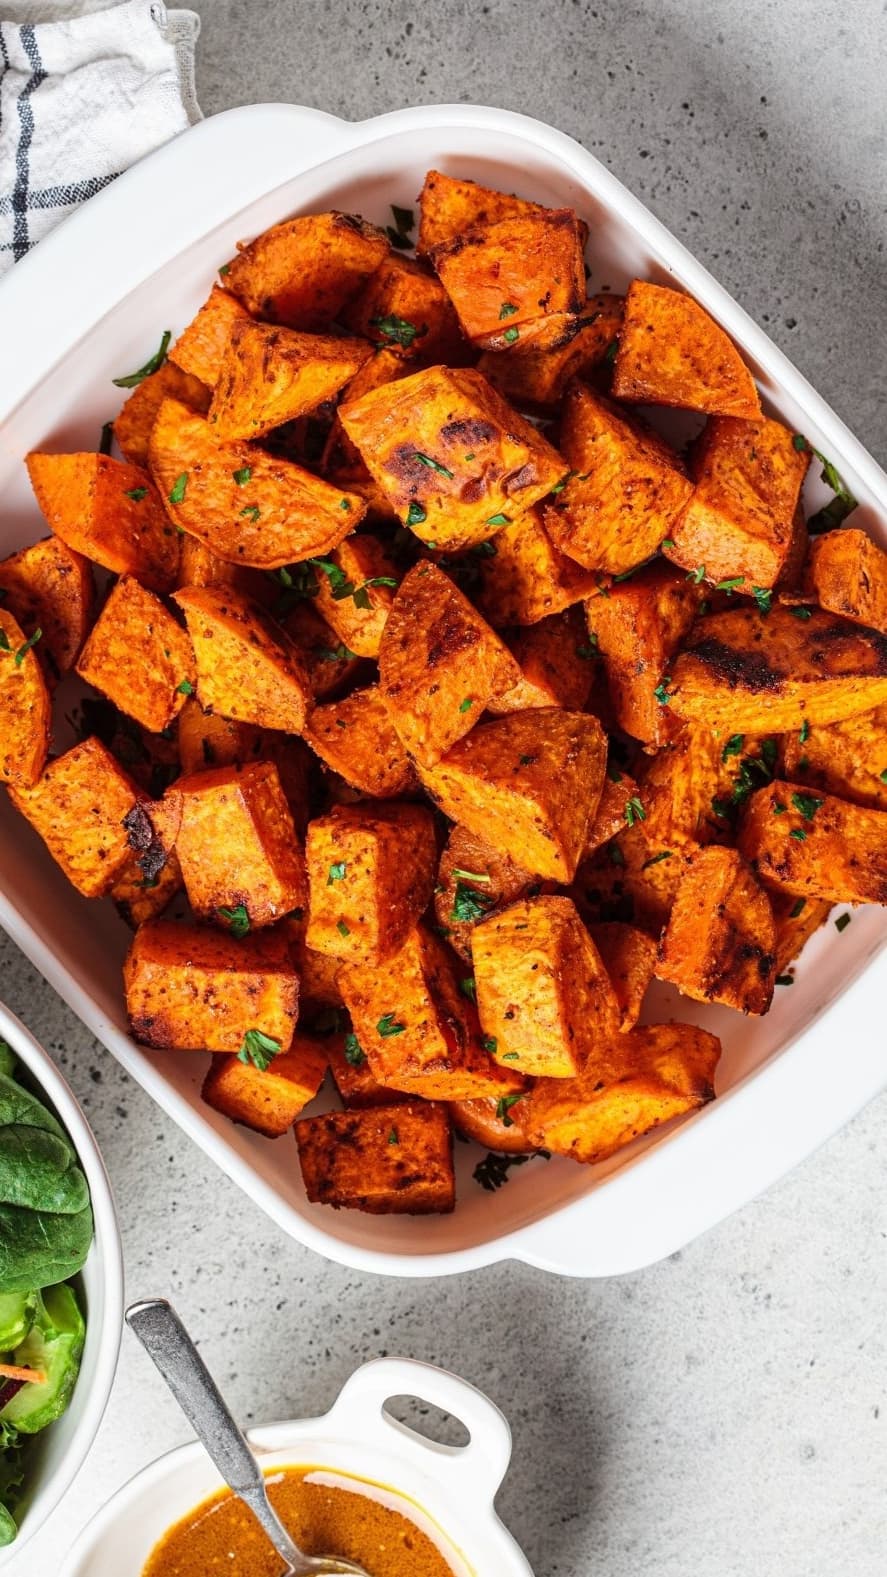 Diced roasted sweet potatoes in a square pan